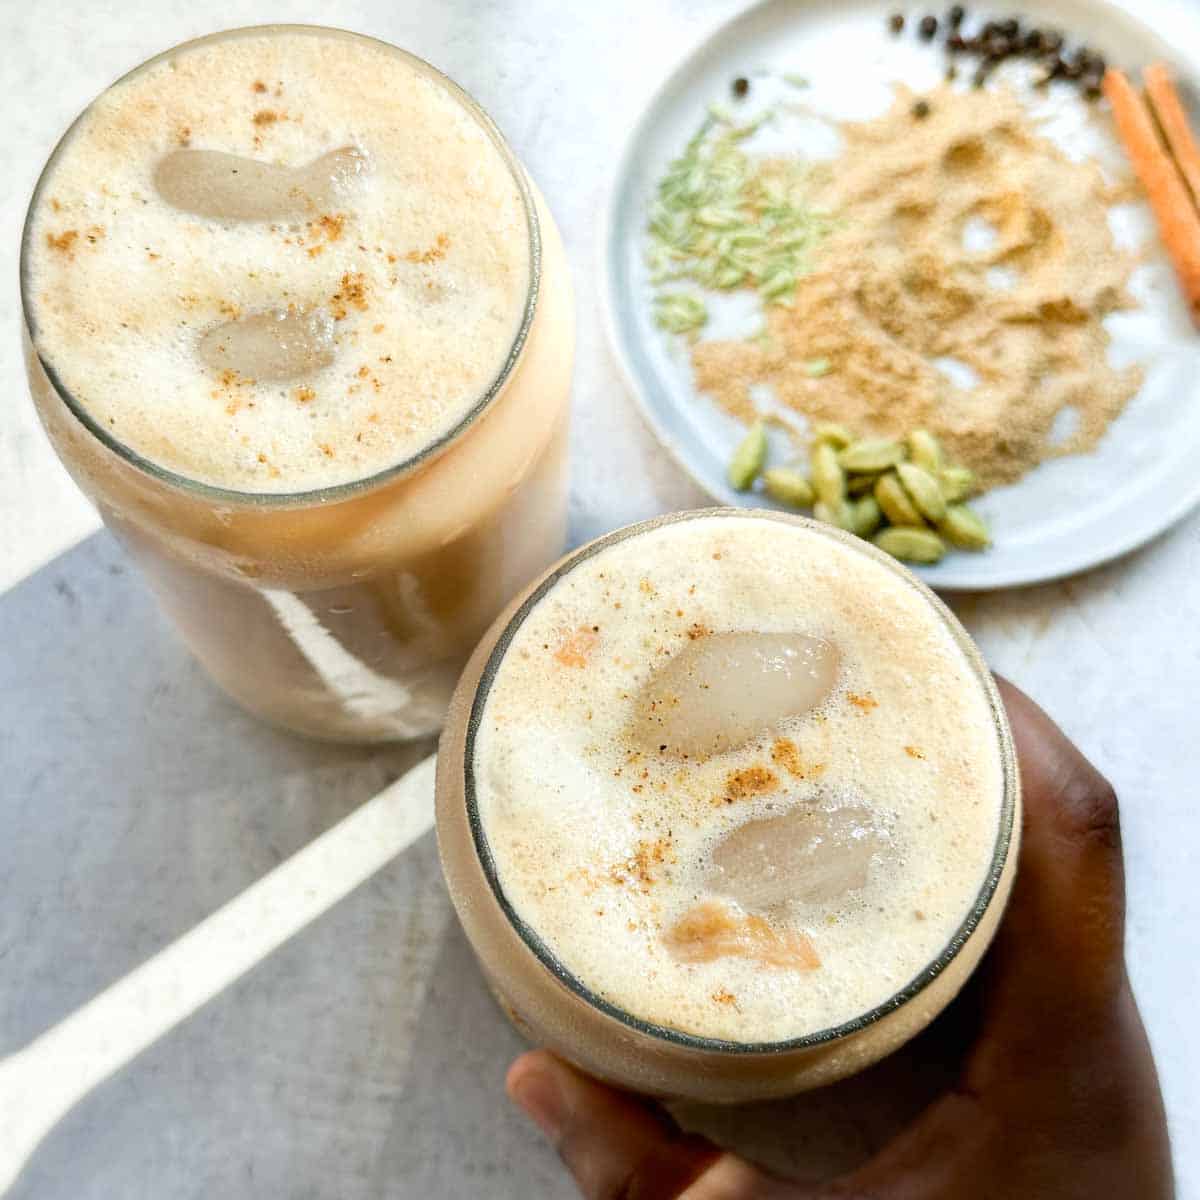 Two tall glasses filled with frothy iced masala chai. A brown hand grabbing one glass of chai. Chai masala or chai spices in the top right hand side of the photo.